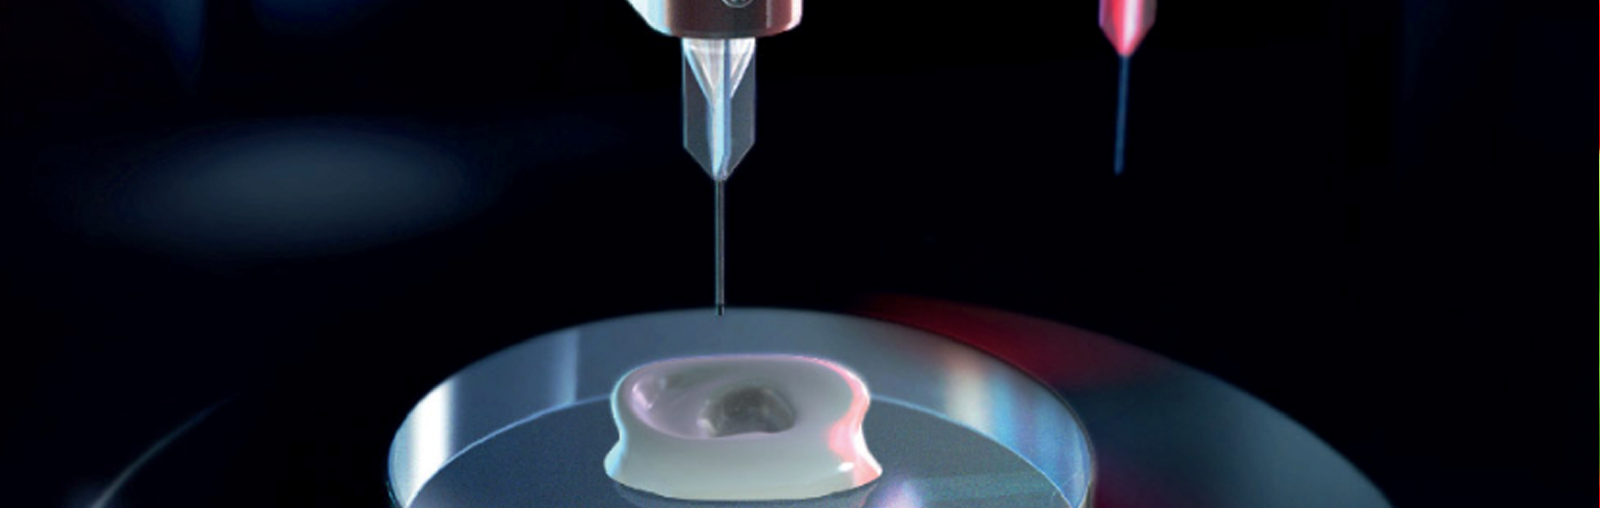 Collplant Develops First Prototypes For Regenerative 3D Bioprinted Breast Implants